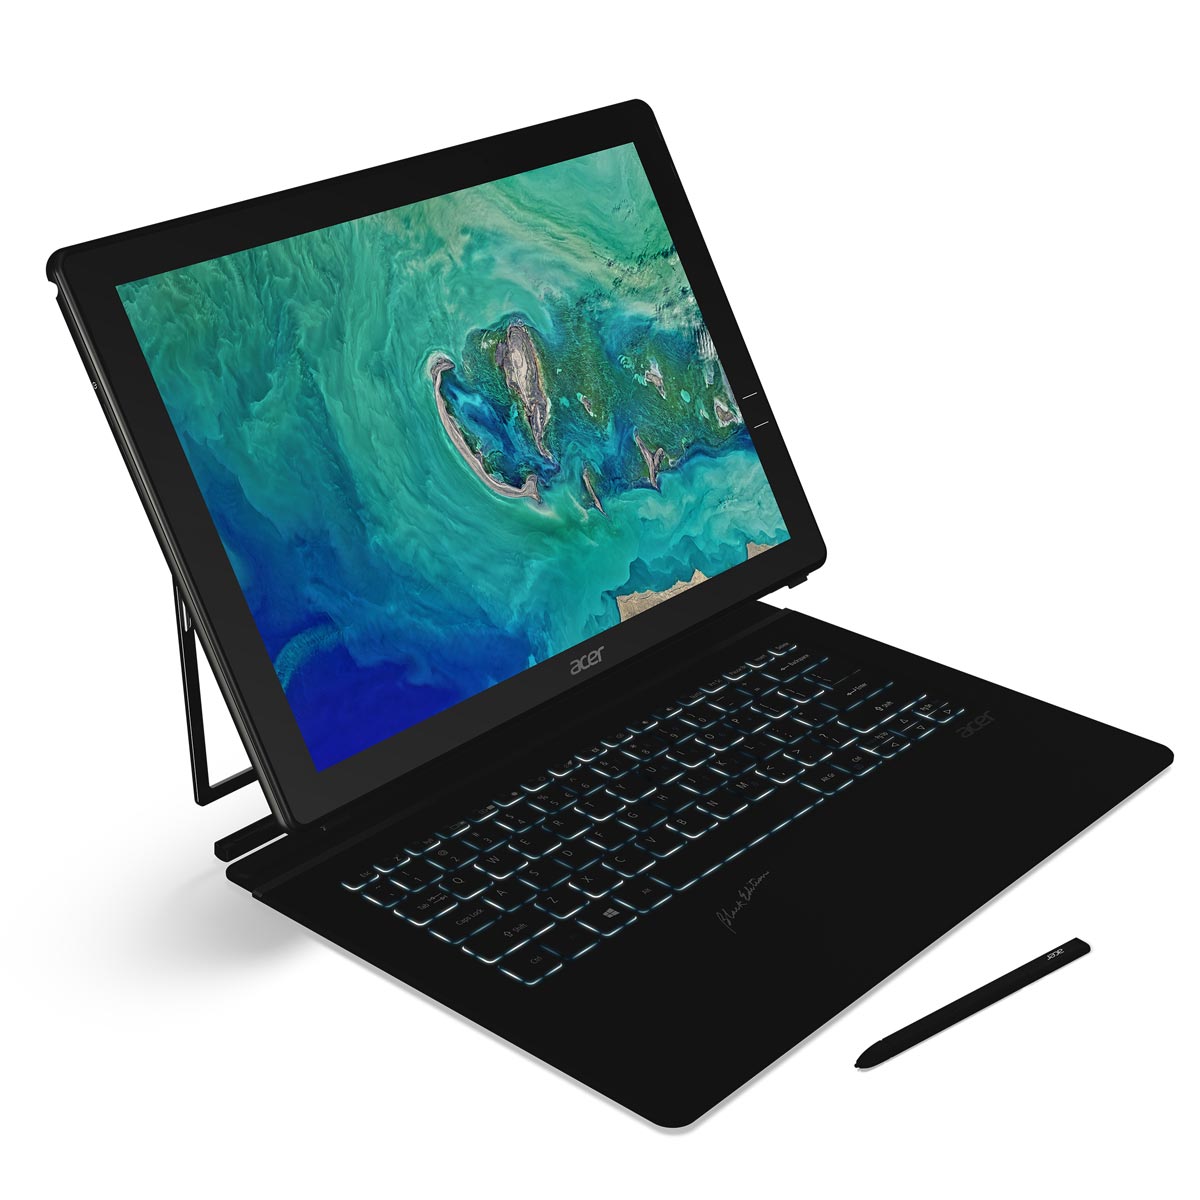 Acer's Switch 7 2-in-1 notebook offers liquid-cooling and discrete graphics